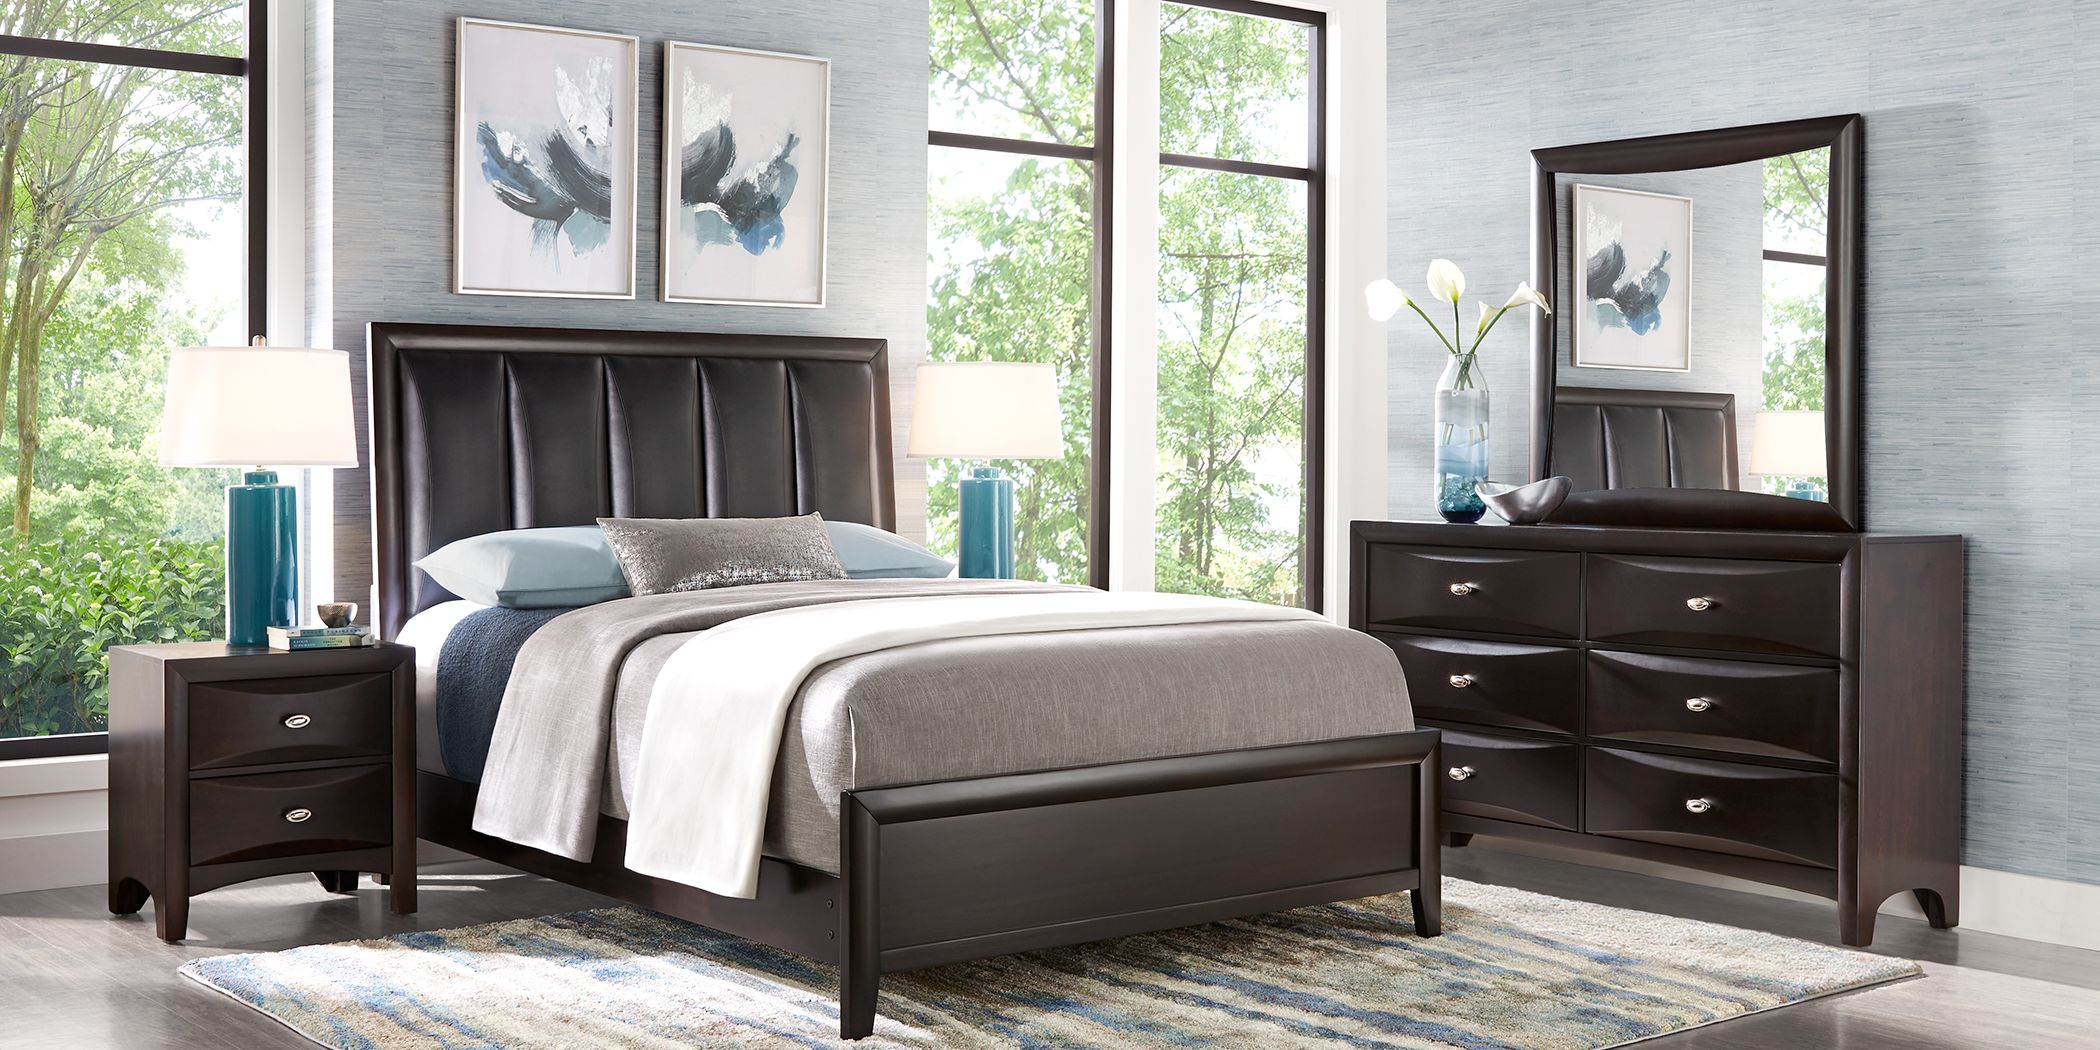 Bedroom Furniture Rooms To, Rooms To Go King Size Bed Frame